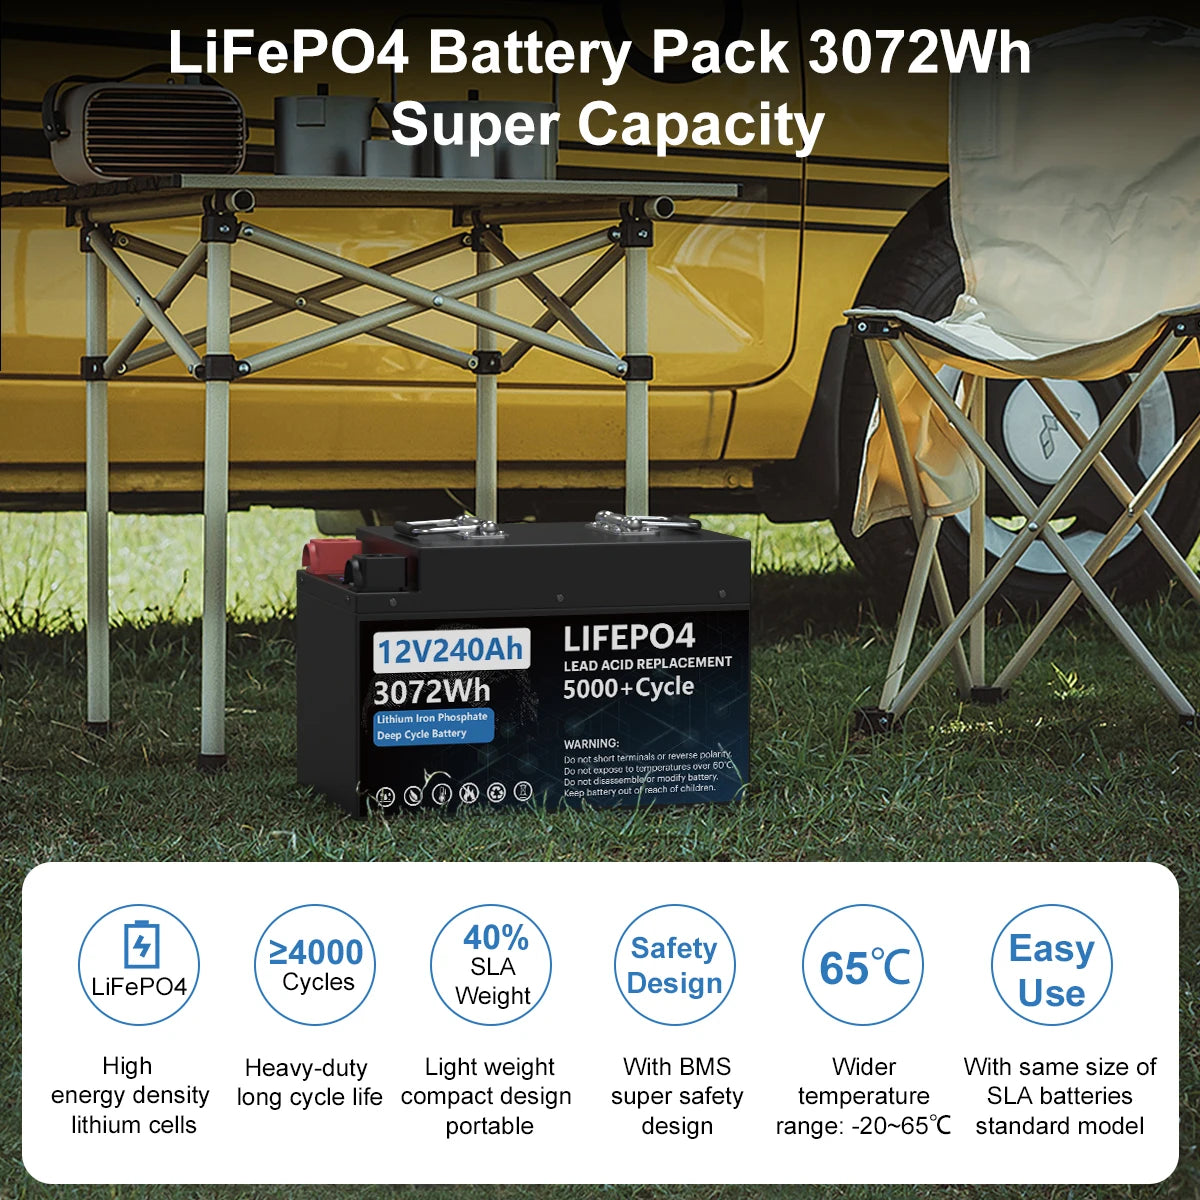 12V 200AH 240AH LiFePO4 Battery, High-performance LiFePO4 battery pack with 3072Wh capacity, reliable, compact, and lightweight.